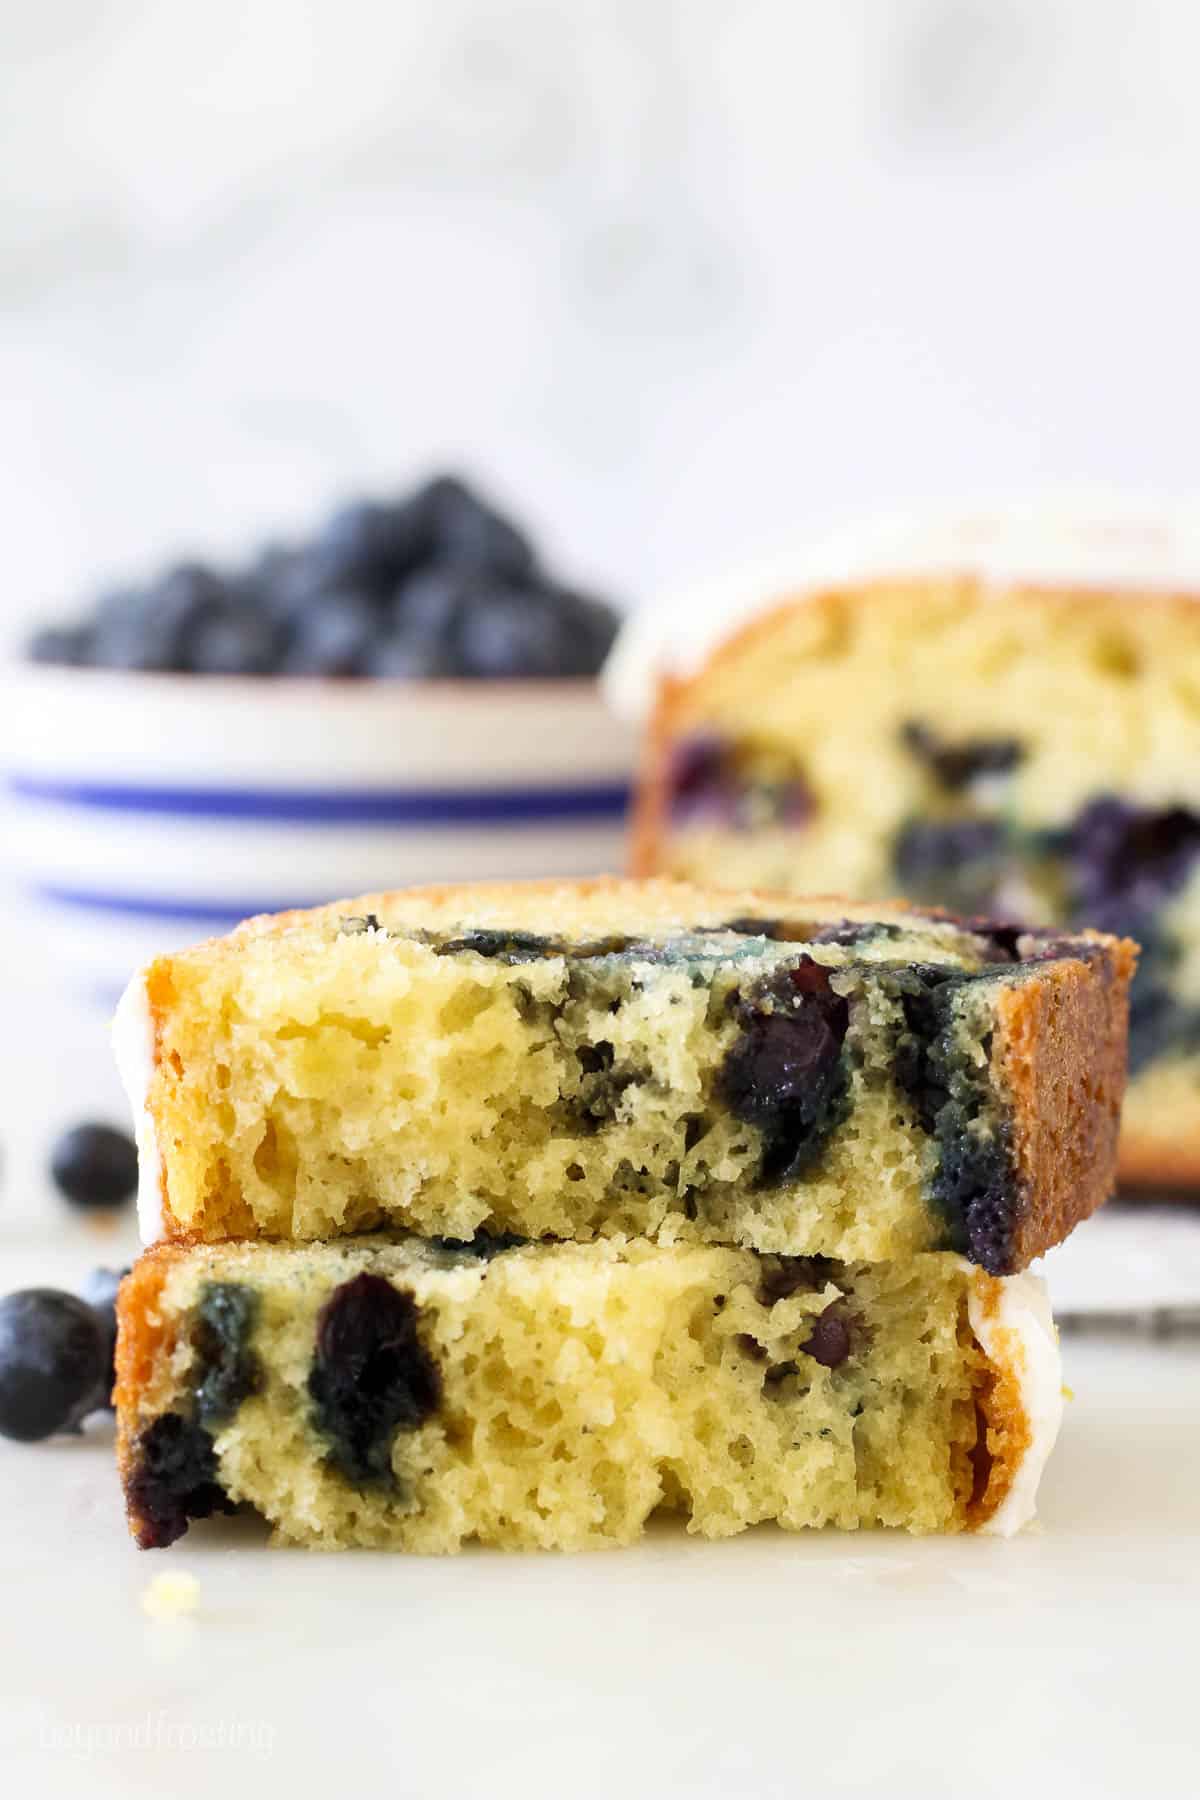 A slice of blueberry bread broken in half to show the inside of the bread